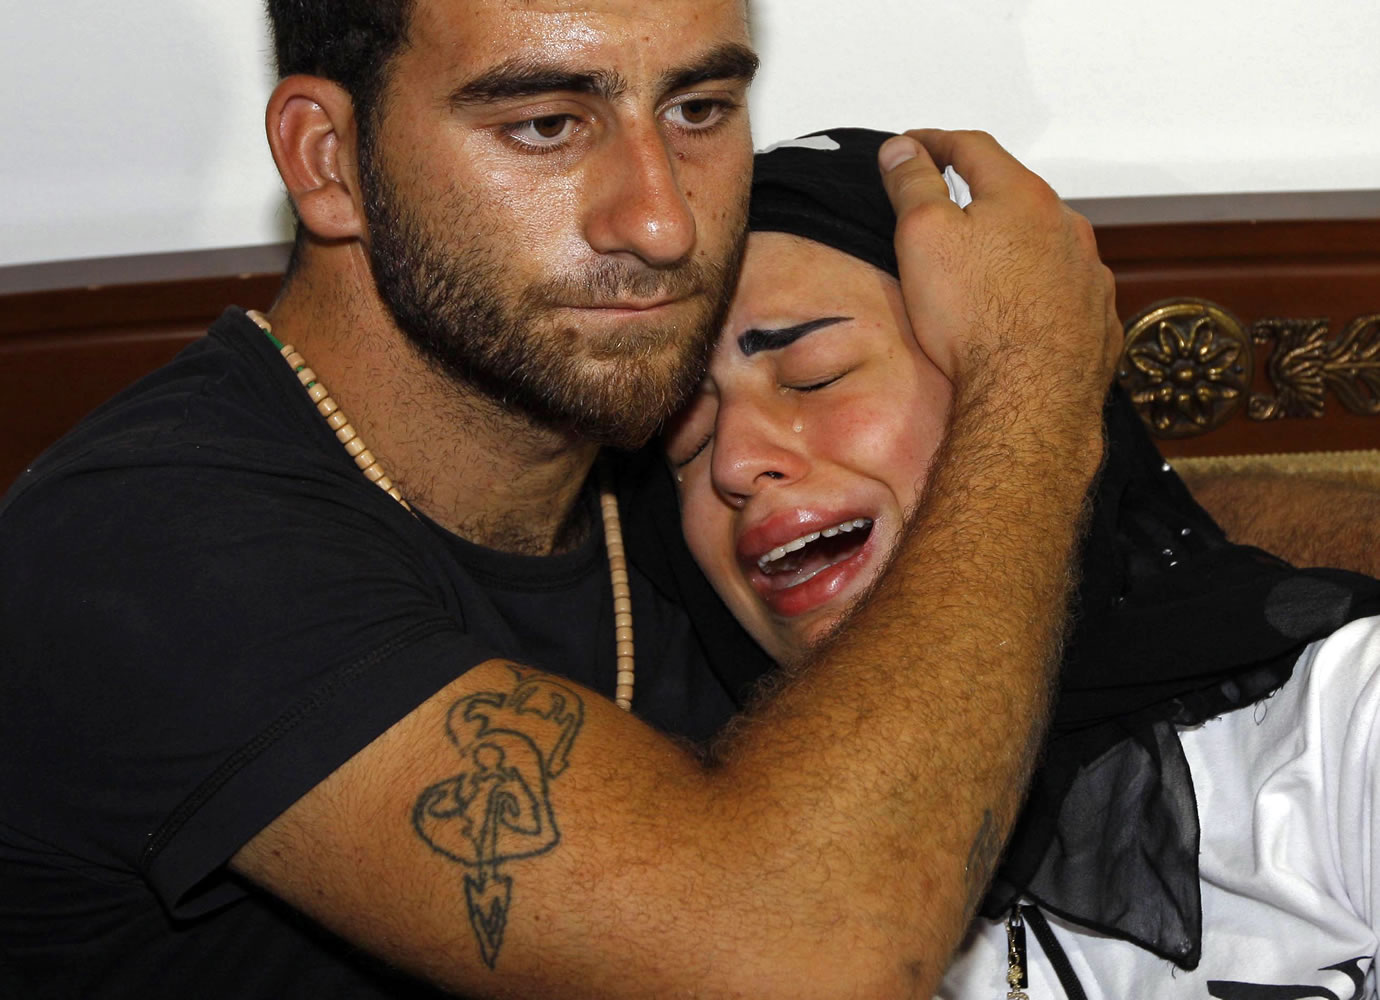 Fatima, right, daughter of Mohammed Darrar Jammo a Syrian political analyst and one of Syrian President Bashar Assad's strongest defenders, who was gunned down inside his home, is comforted by a relative as she mourns her father in the southern coastal town of Sarafand, Lebanon, on Wednesday.